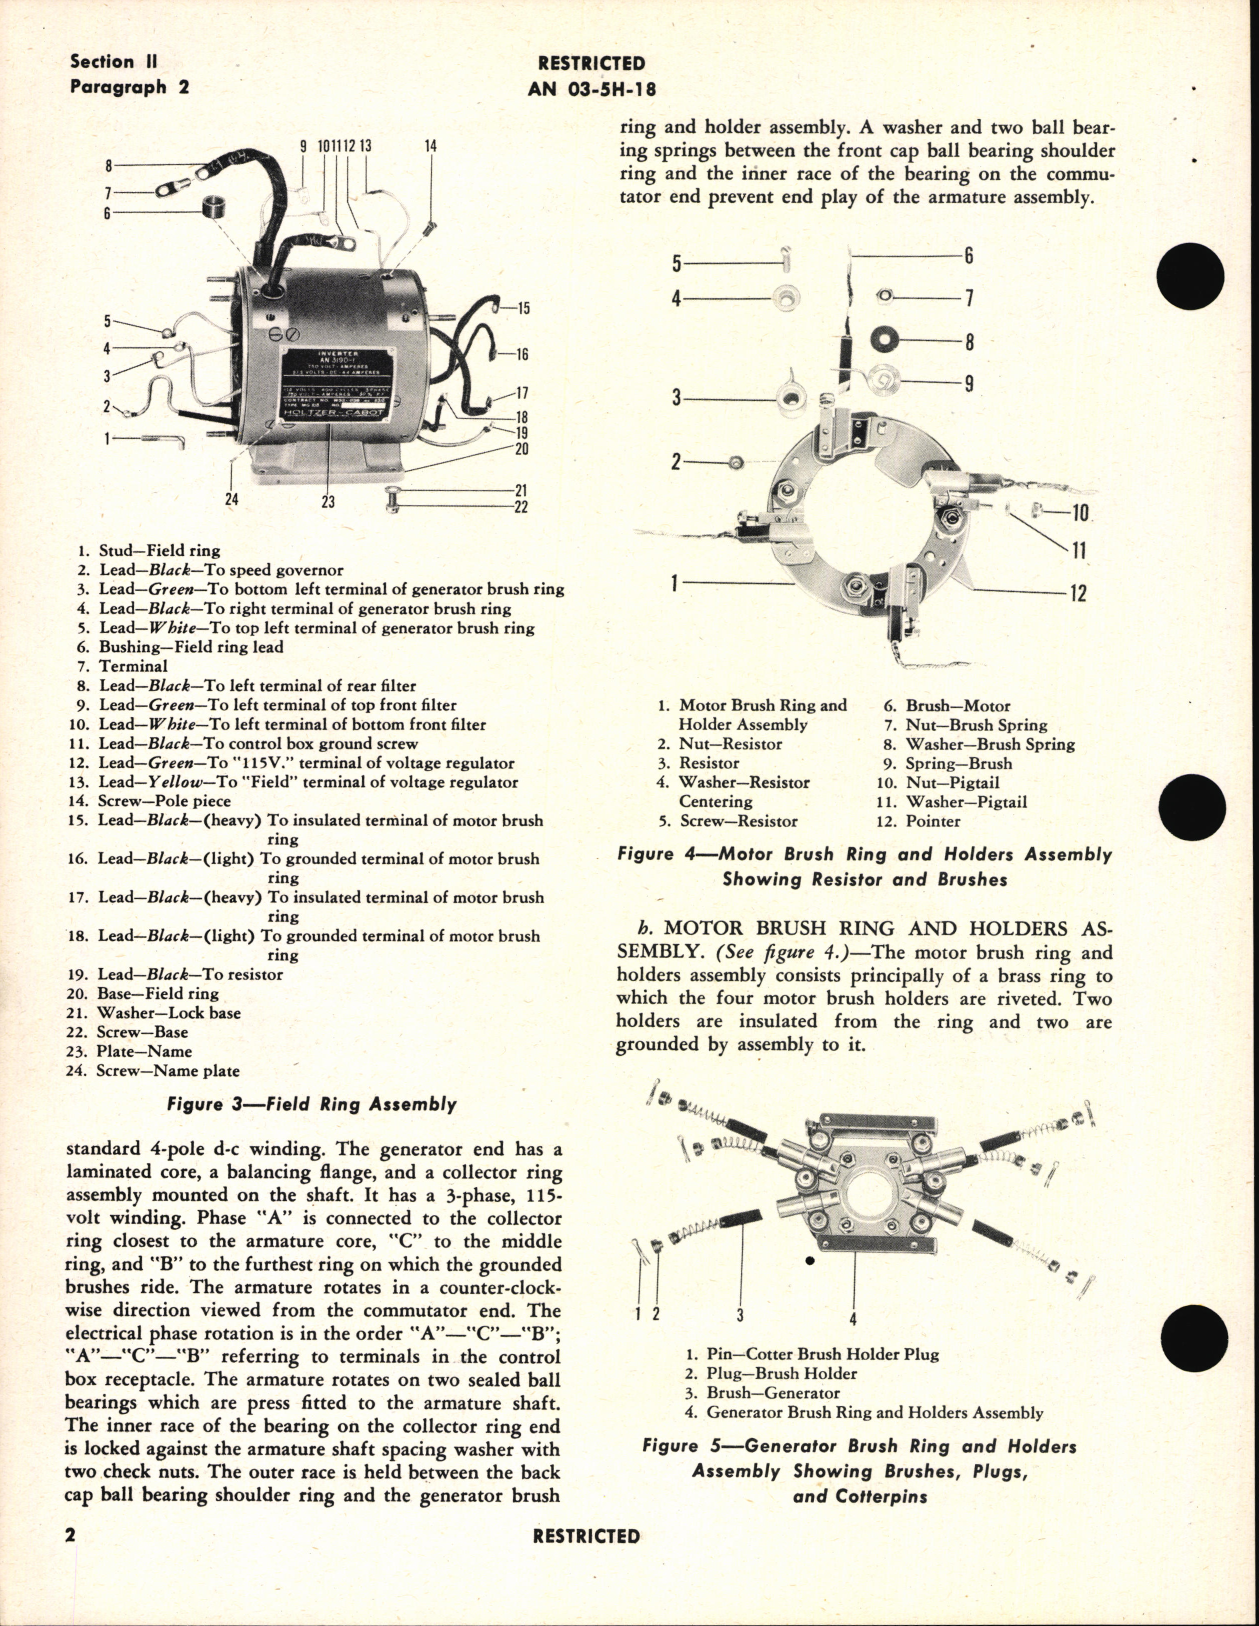 Sample page 6 from AirCorps Library document: Operation, Service & Overhaul Instructions with Parts Catalog for Inverter Type MG-215